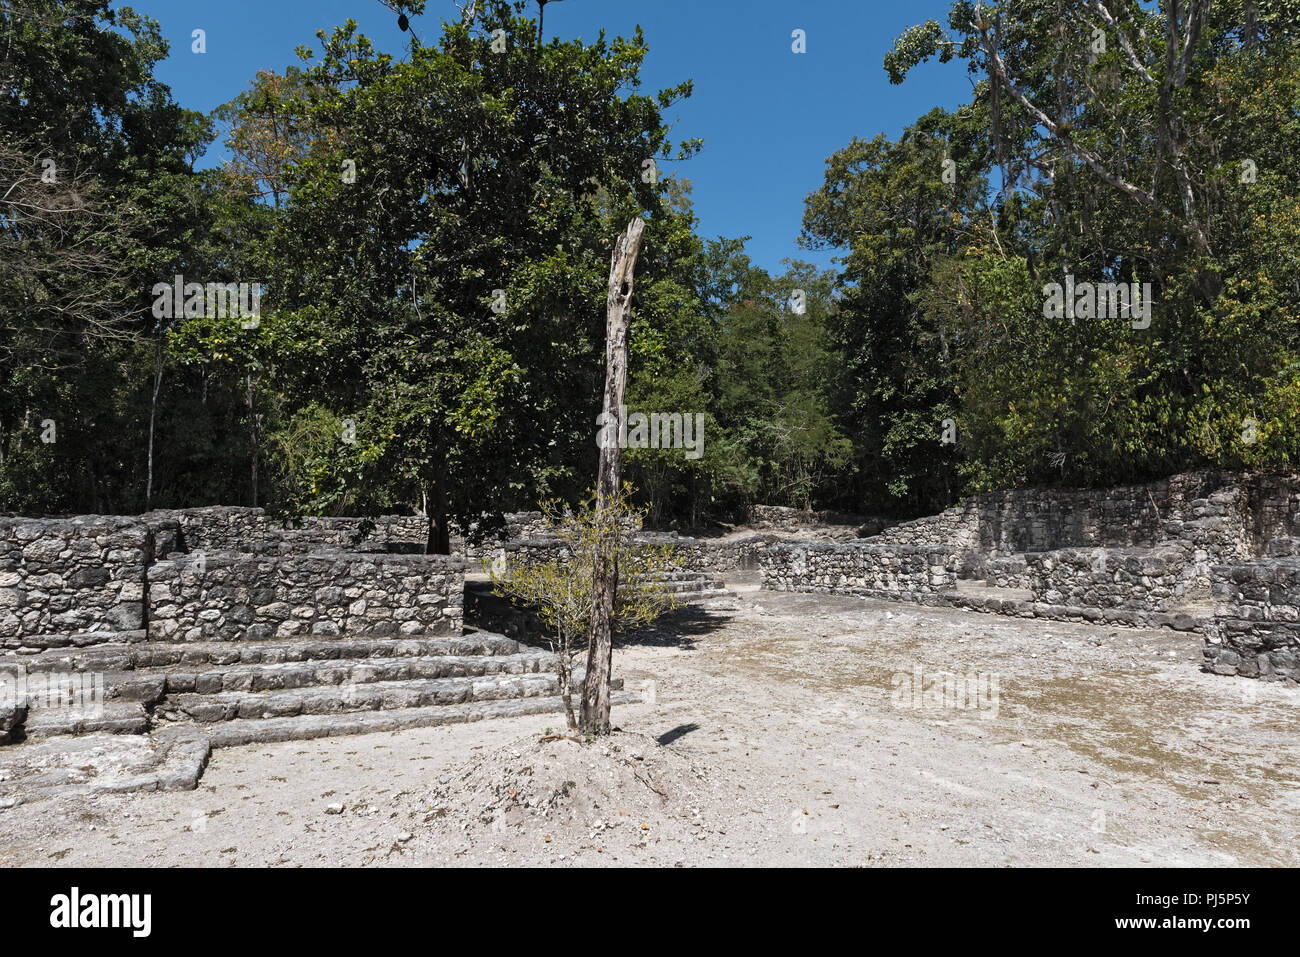 The ruins of the ancient Mayan city of calakmul, campeche, Mexico Stock Photo